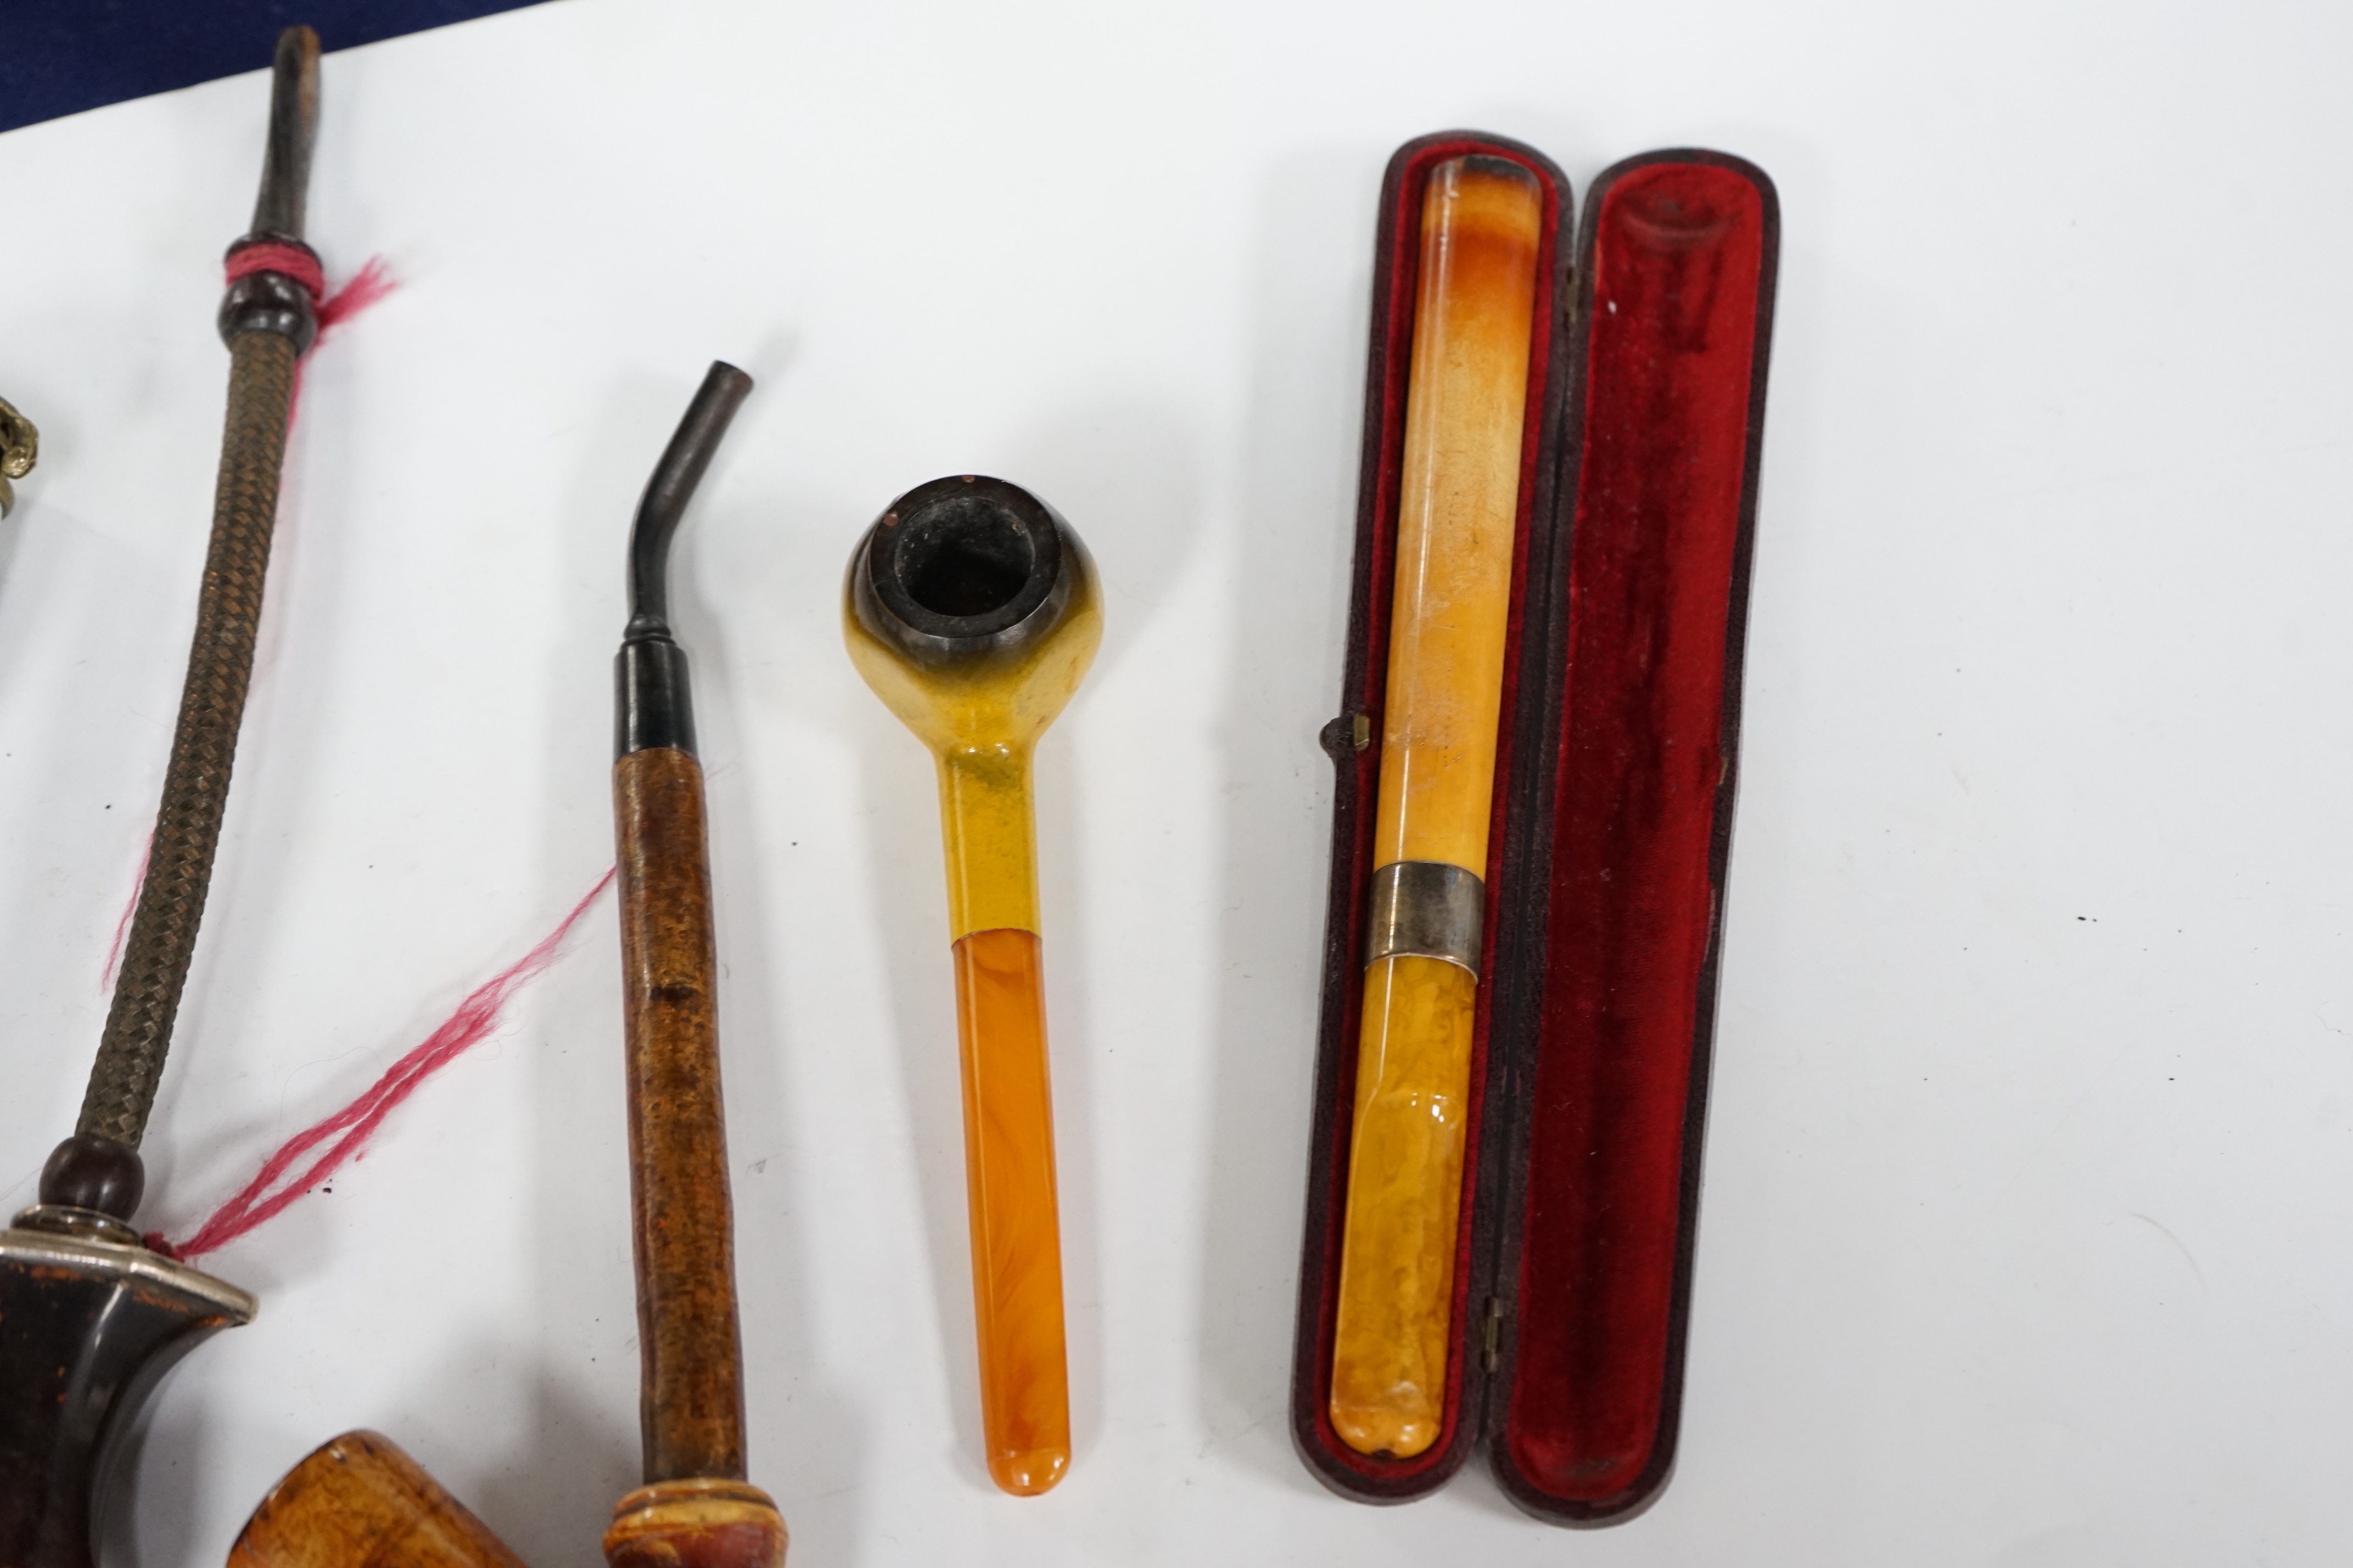 Seven pipes, three with amber mouthpieces, two cased and two without mouthpieces, longest cased pipe 20cm long